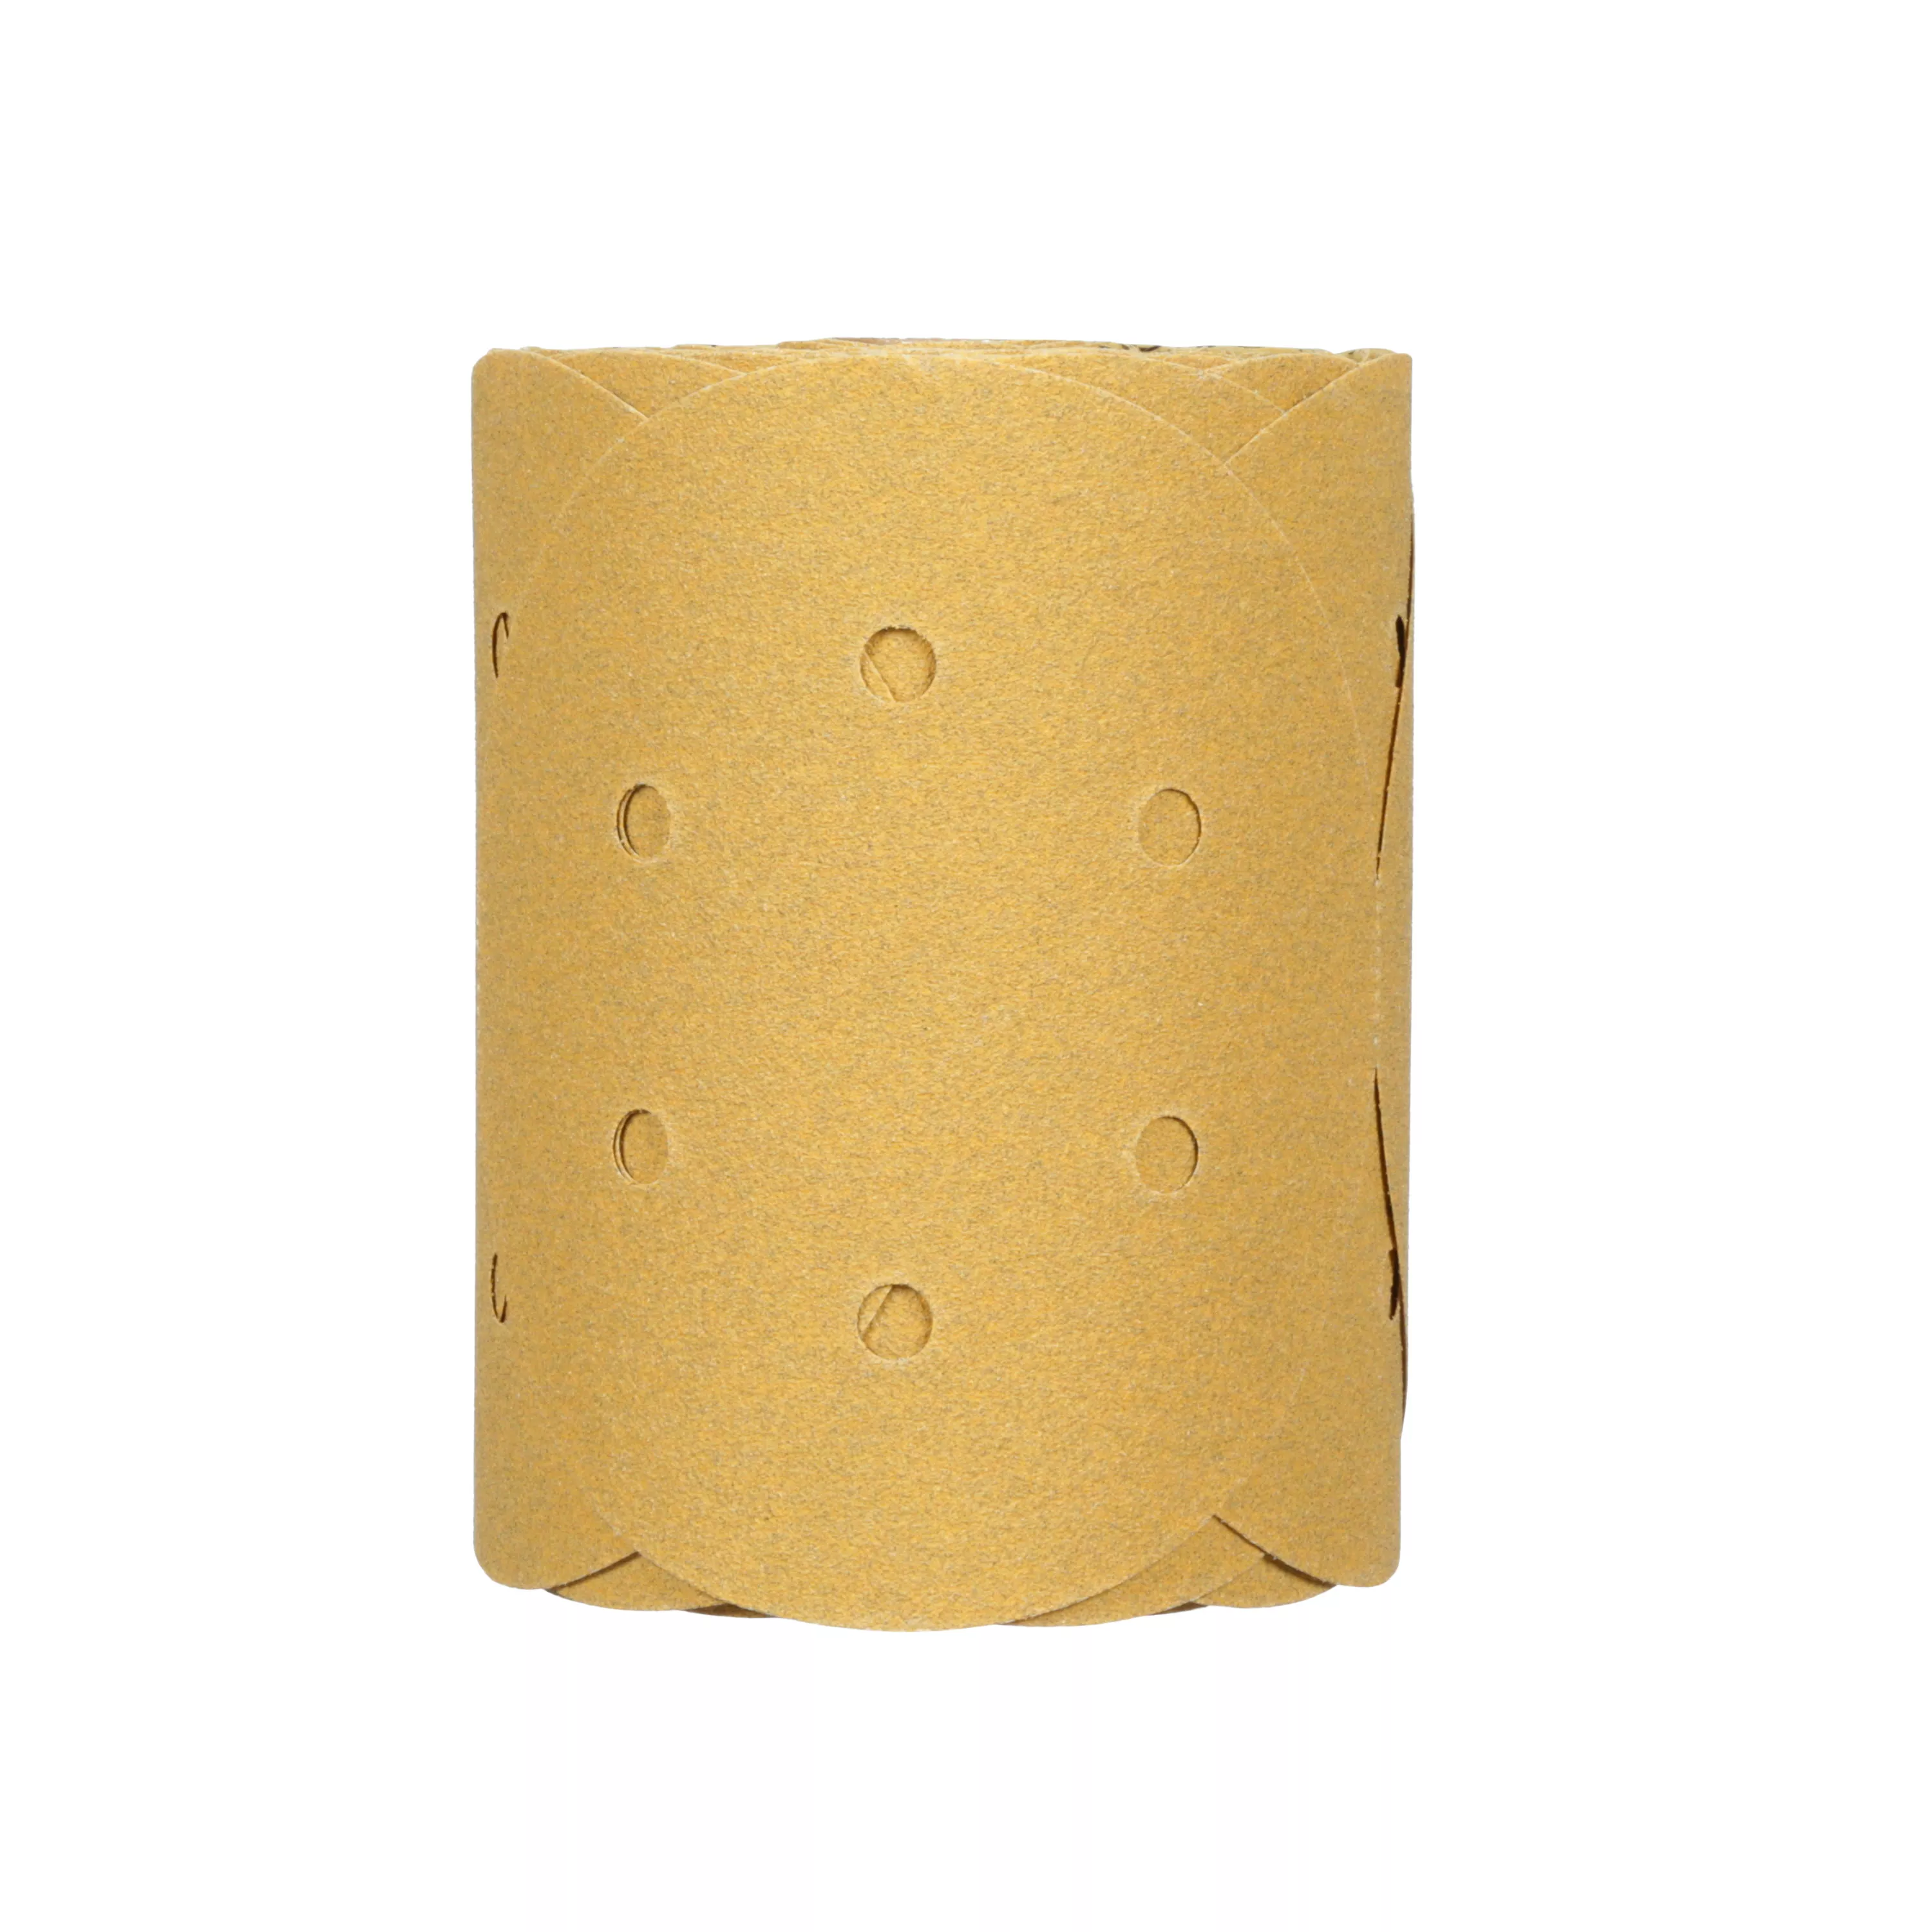 Product Number 236U | 3M™ Stikit™ Gold Disc Roll Dust Free